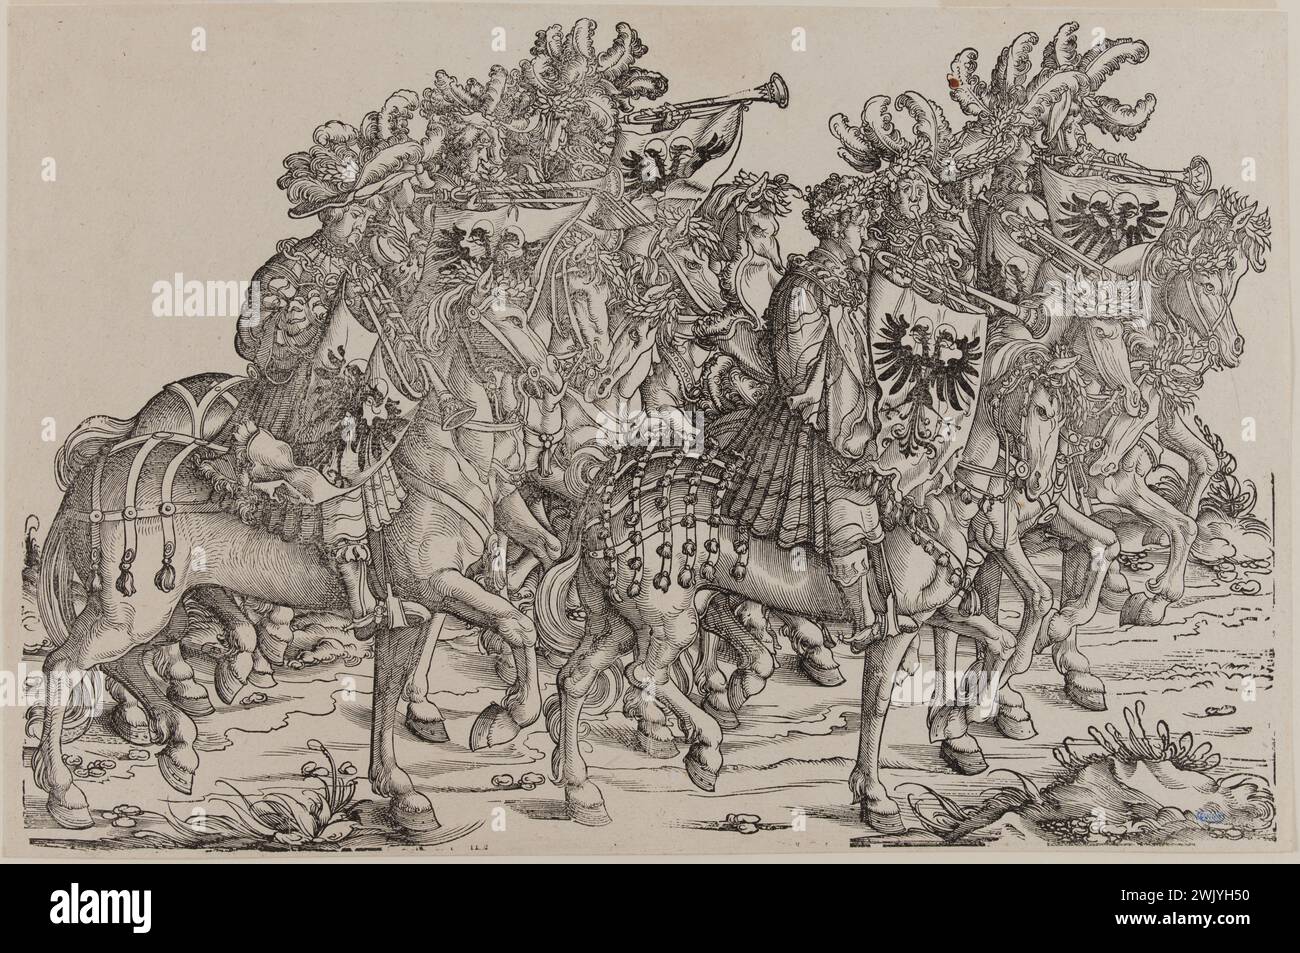 Hans Burgkmair, known as the old (1473-1531). The triumphant procession of the Emperor Maximilien I: Herald with horse trumpets (Dornik-Eger 36, Bartsch 81). Xylography, 1512-1519. Museum of Fine Arts of the City of Paris, Petit Palais. Drawing, emperor, history, illustration, serious board, triumph, 16th 16th XVI 16th 16th 16th century, xylography, engraving Stock Photo